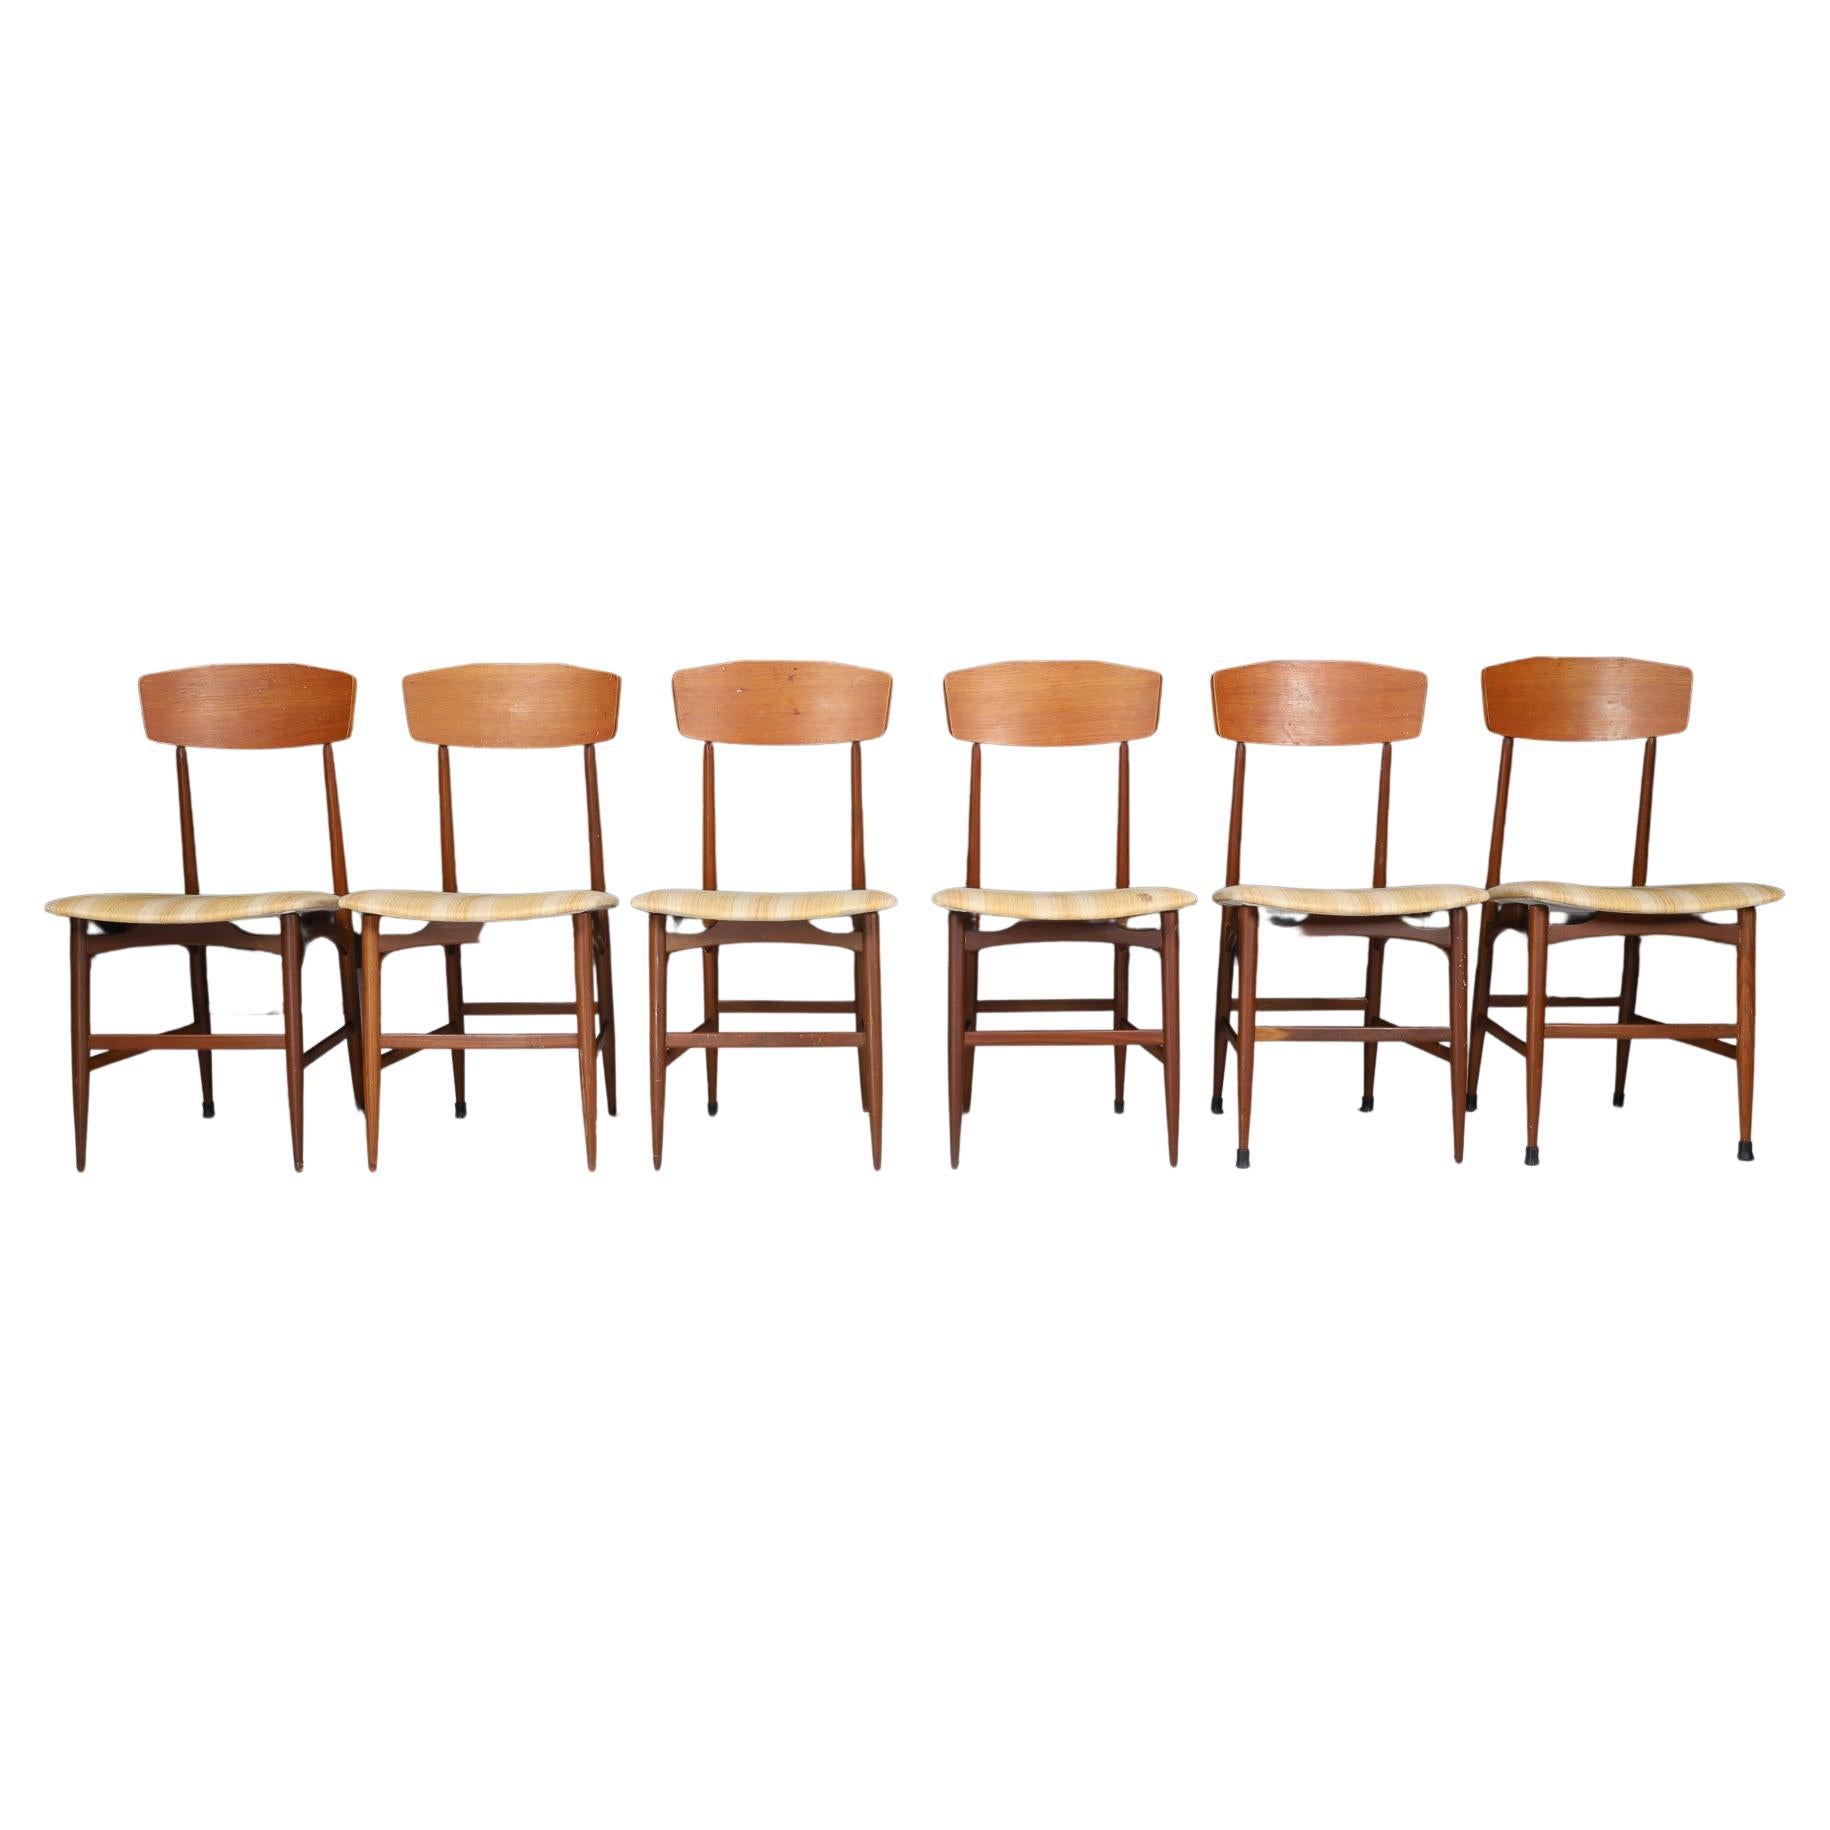 Mid-Century Modern Dining Chairs by Silvio Cavatorta, Italy 1950s For Sale